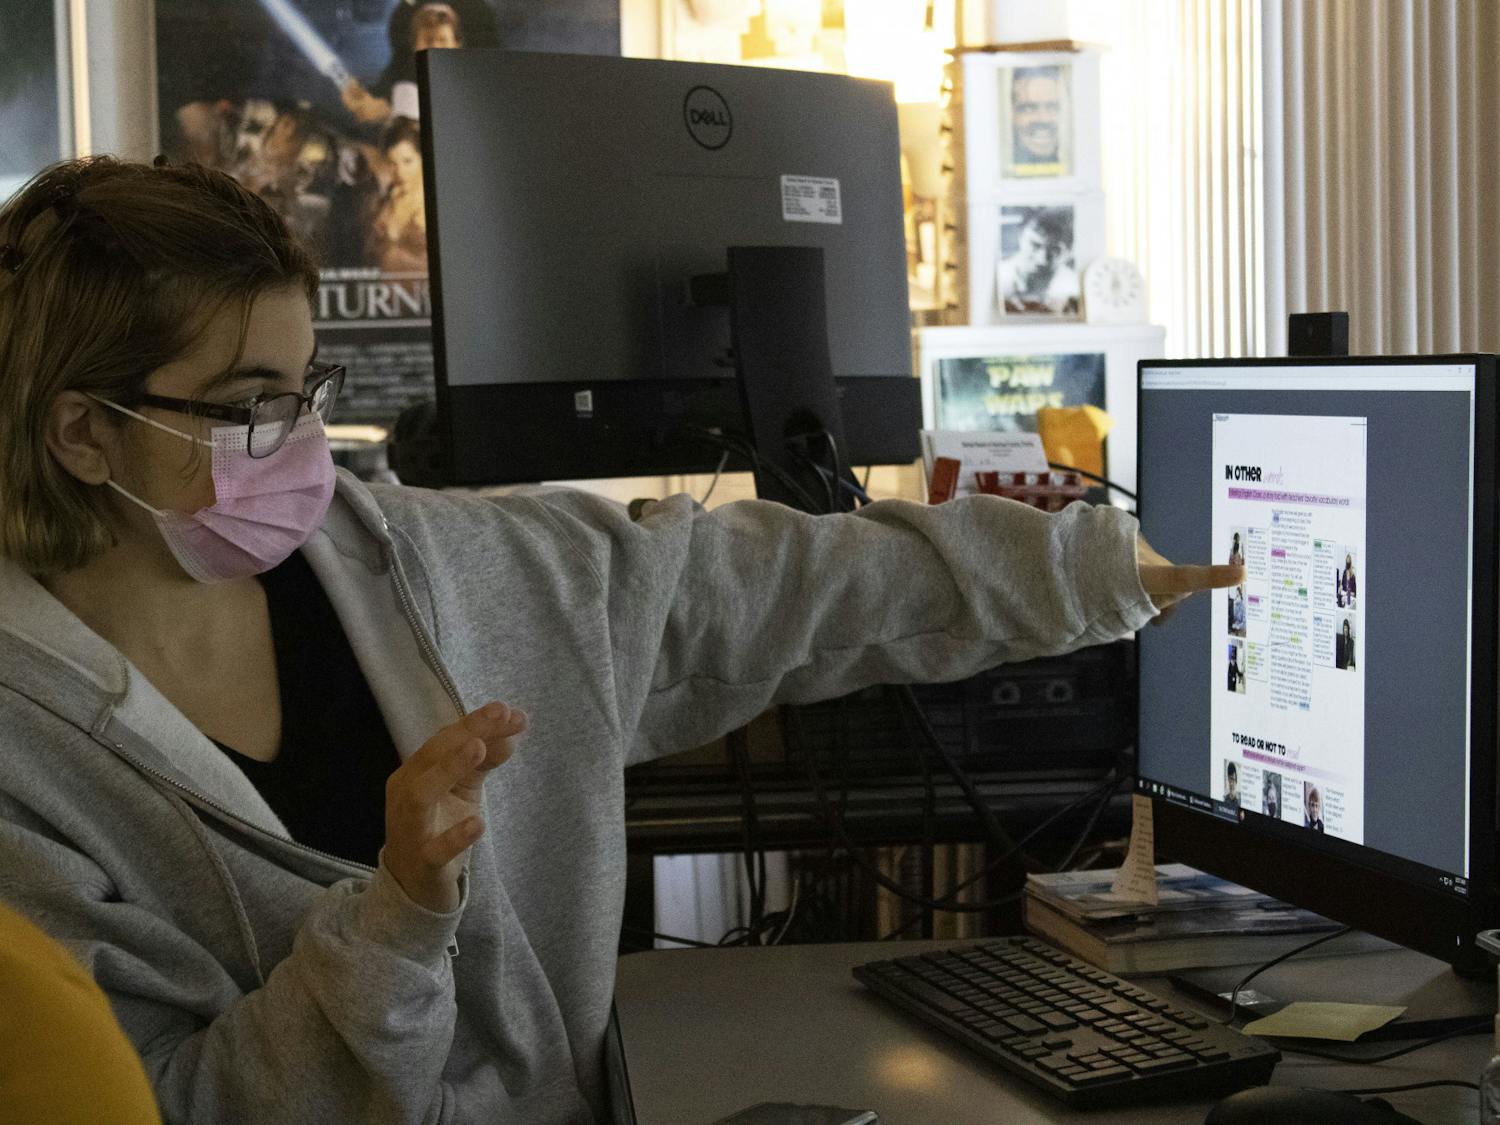 Reyhan Kepic, 18, a senior at Gainesville High School and the editor-in-chief of the school’s yearbook points at a computer screen as she explains the layout of a page spread in the GHS yearbook on Monday, April 12, 2021.